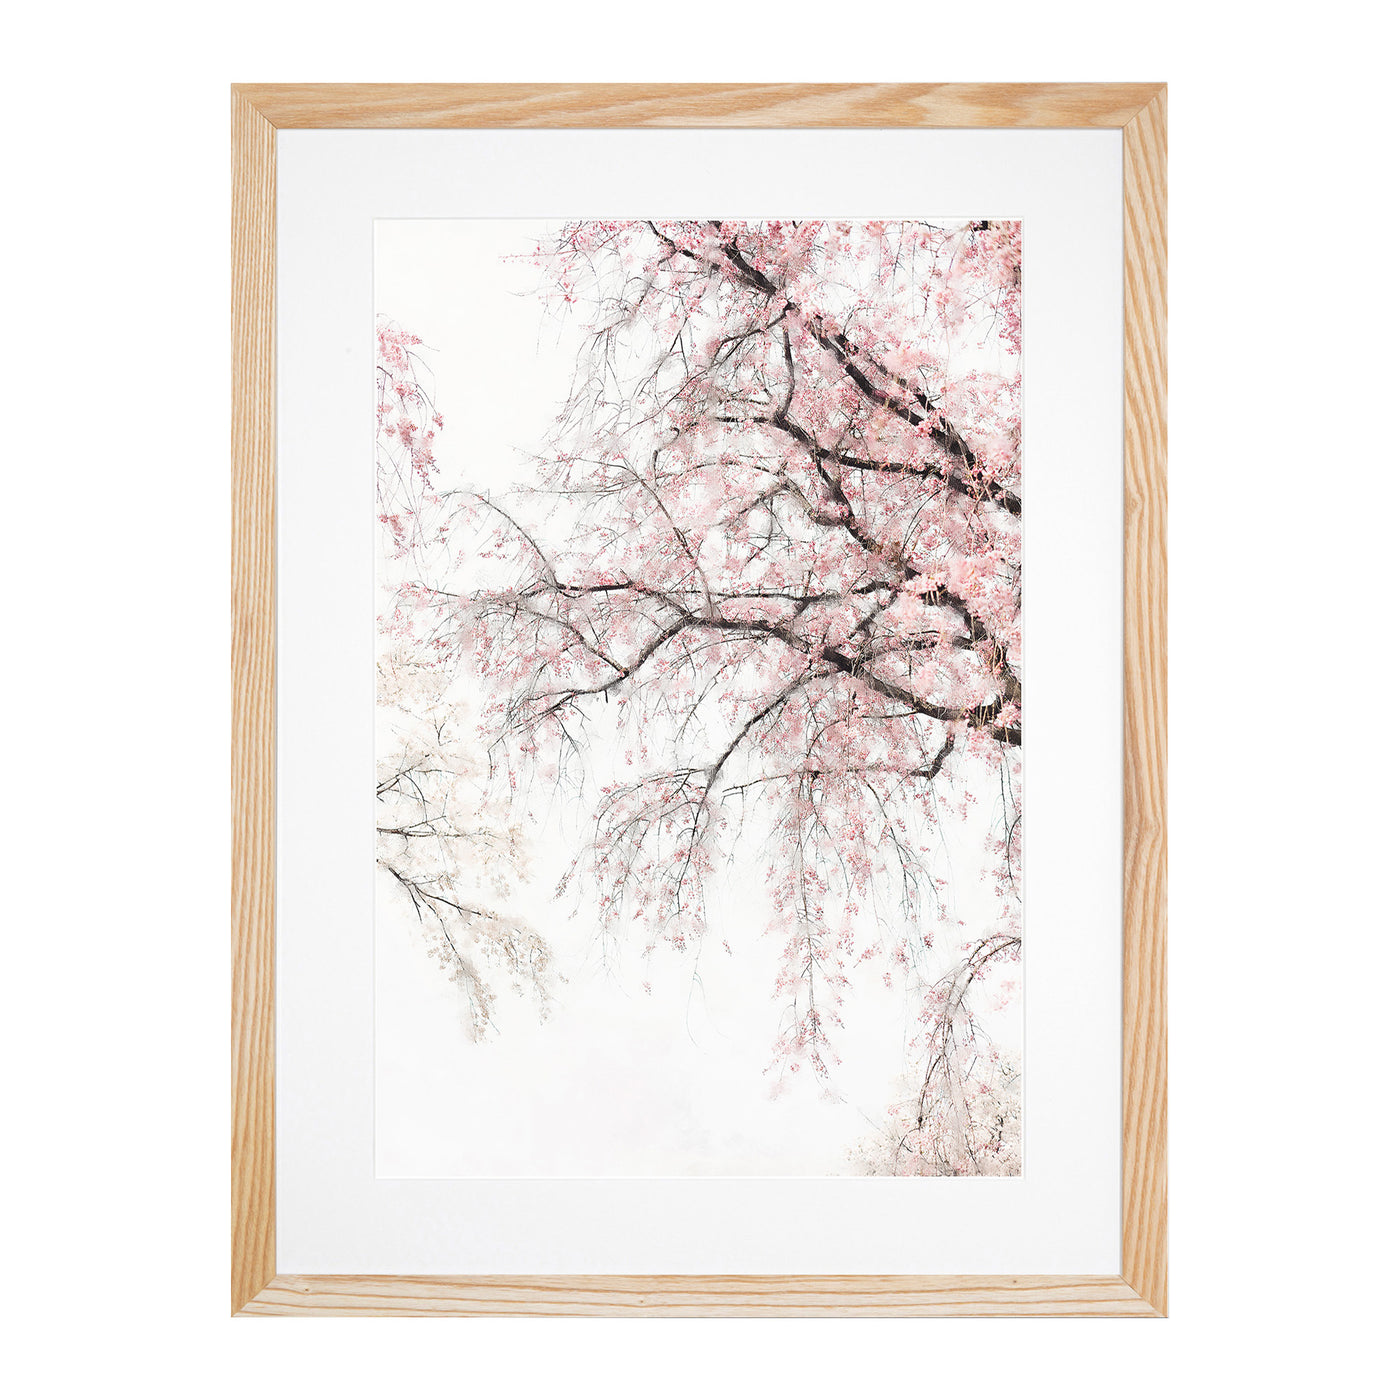 A Pink Cherry Blossom Tree Abstract